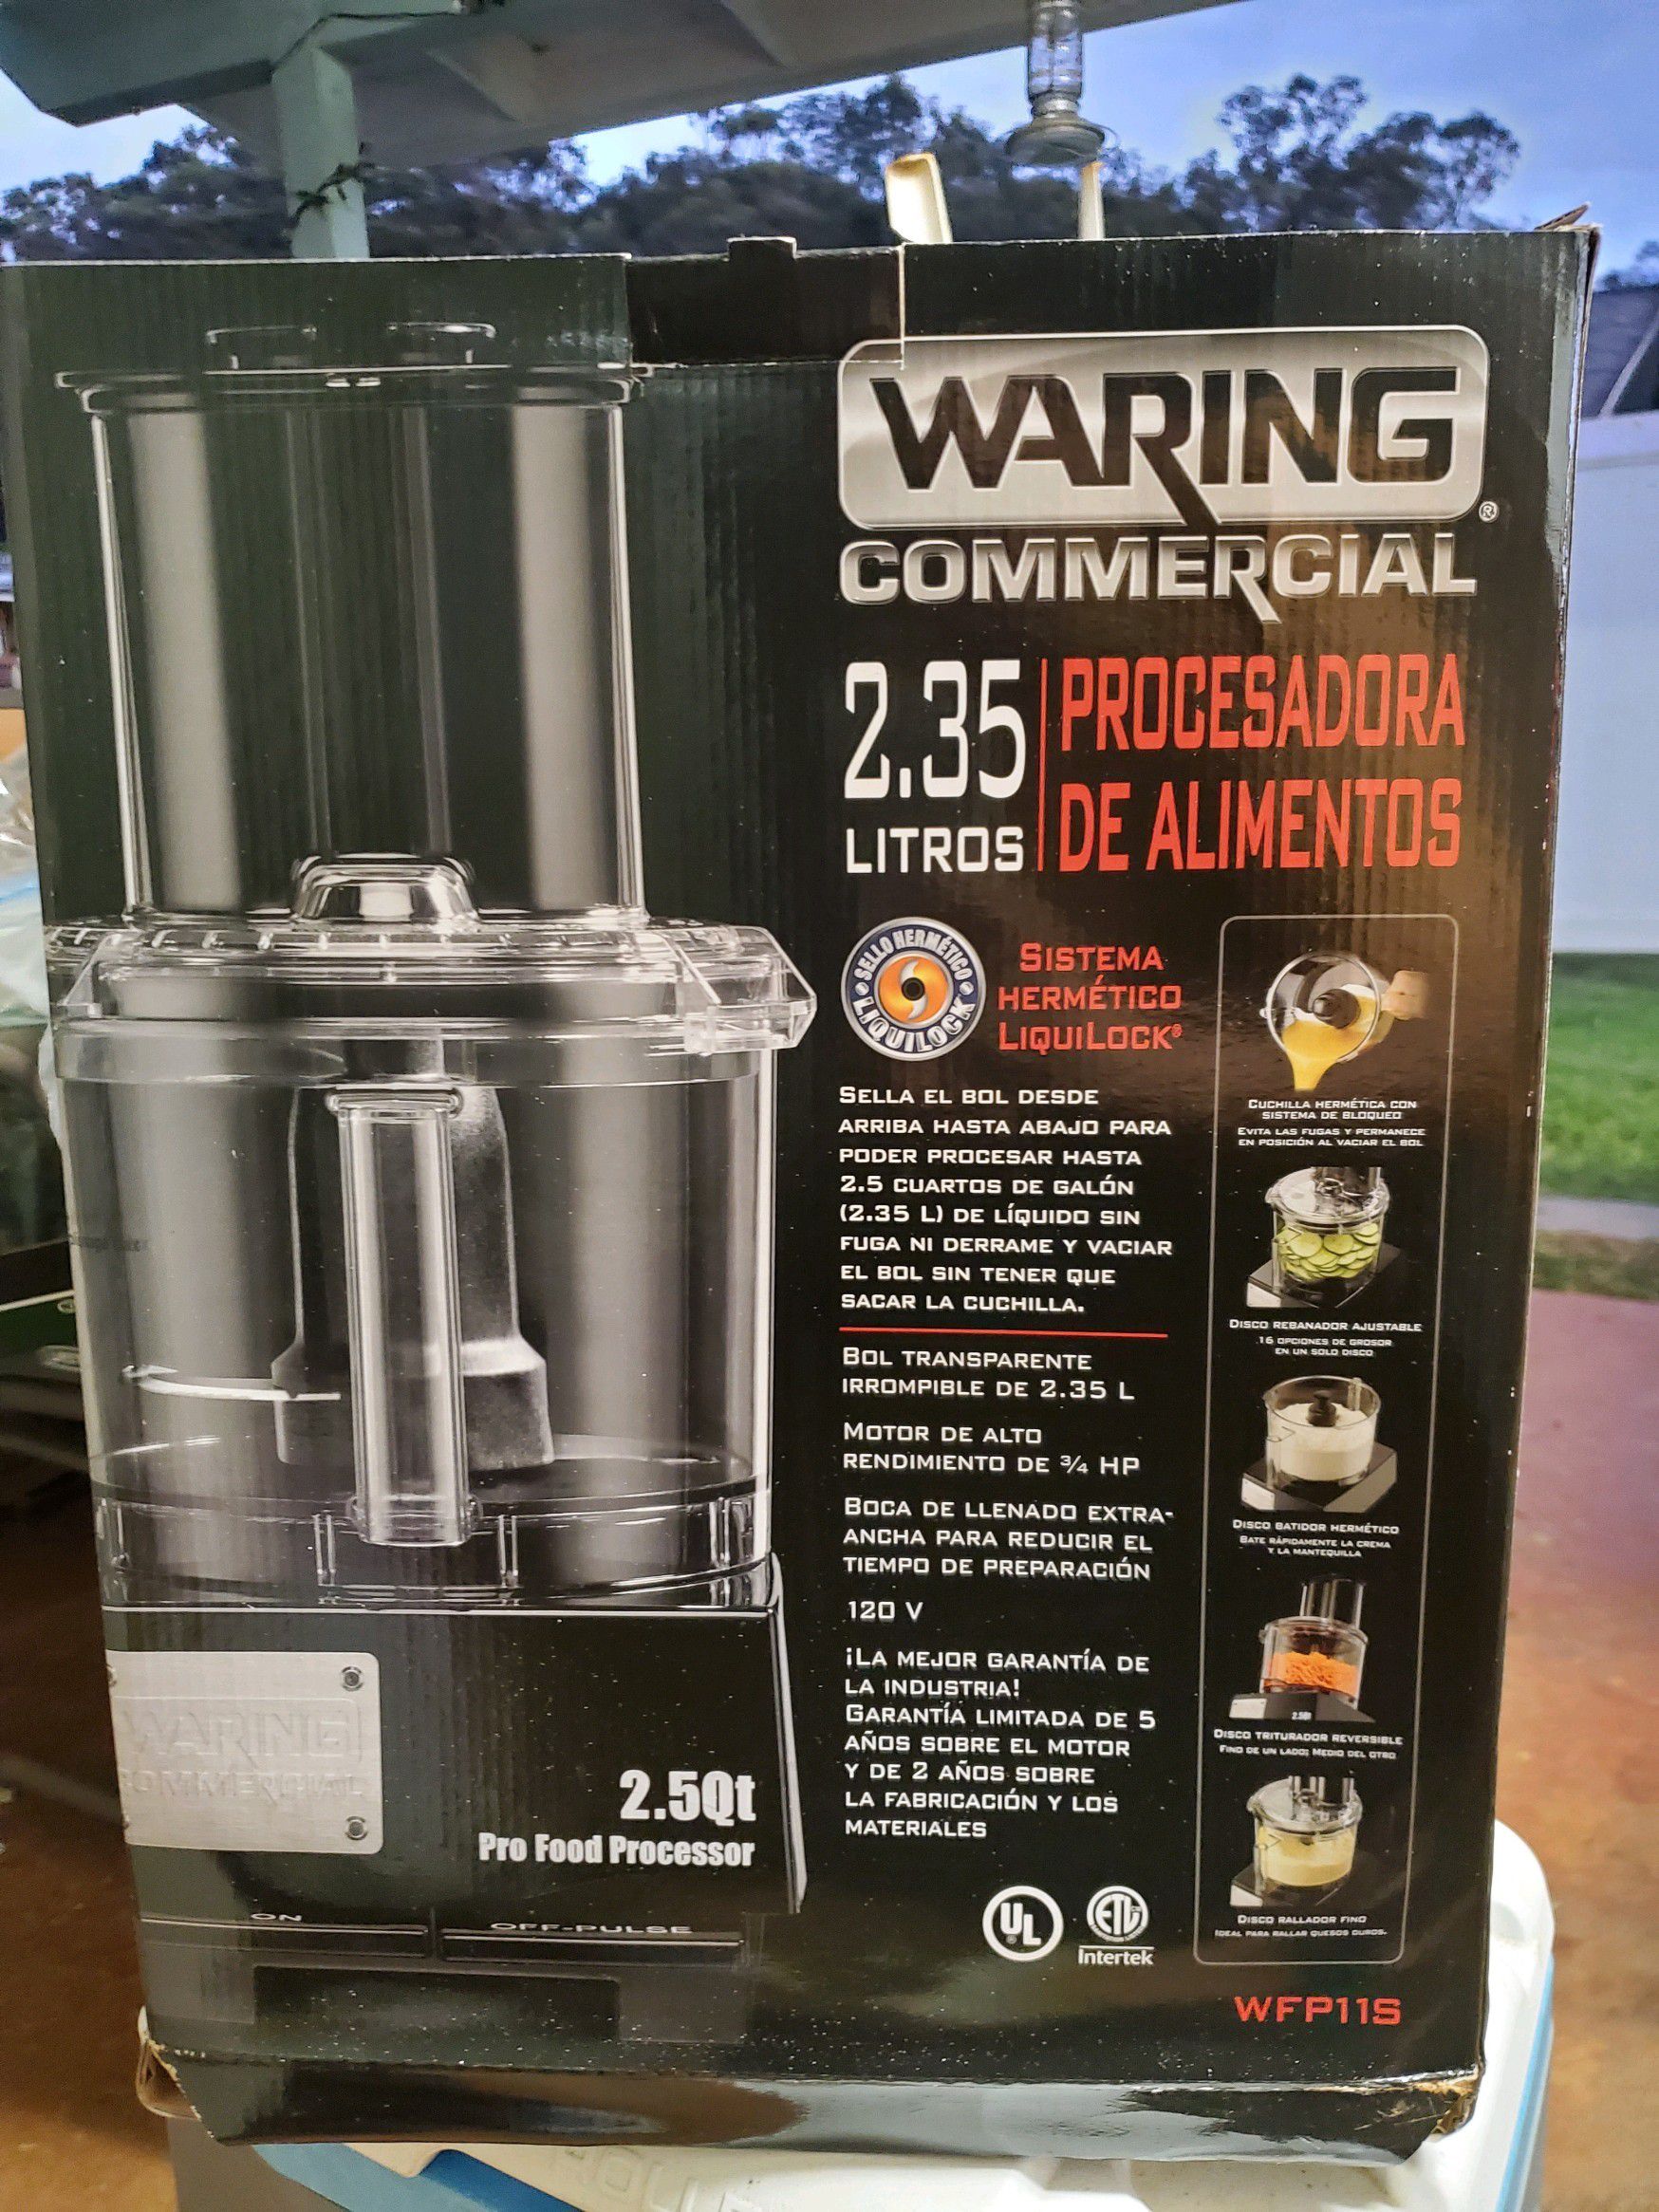 Waring commercial processor